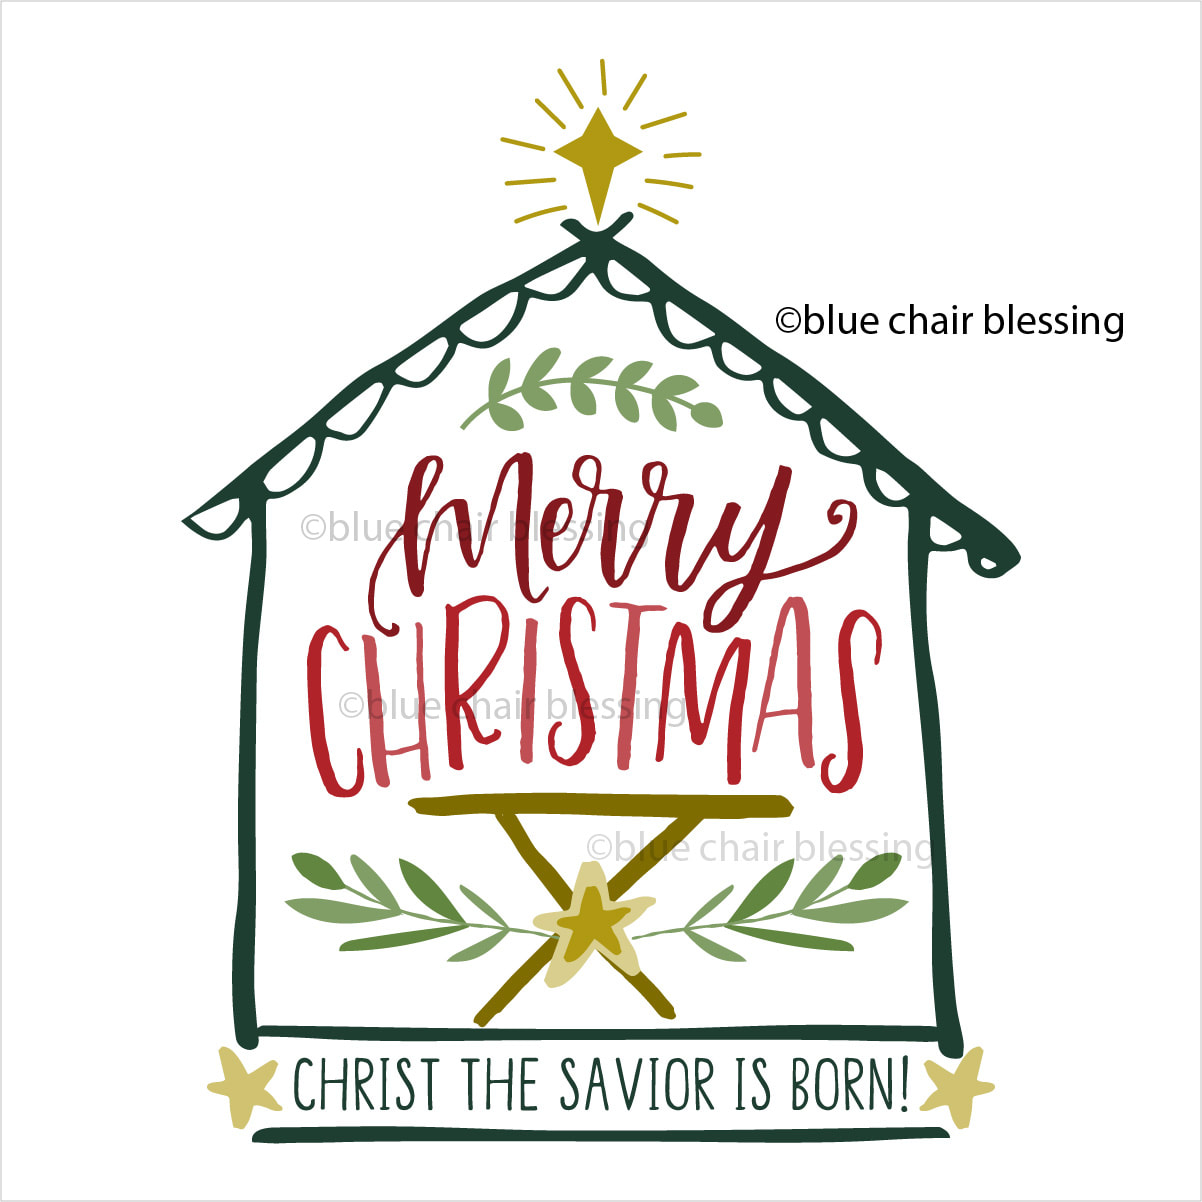 Christian Christmas hand lettered vector clip art and graphics